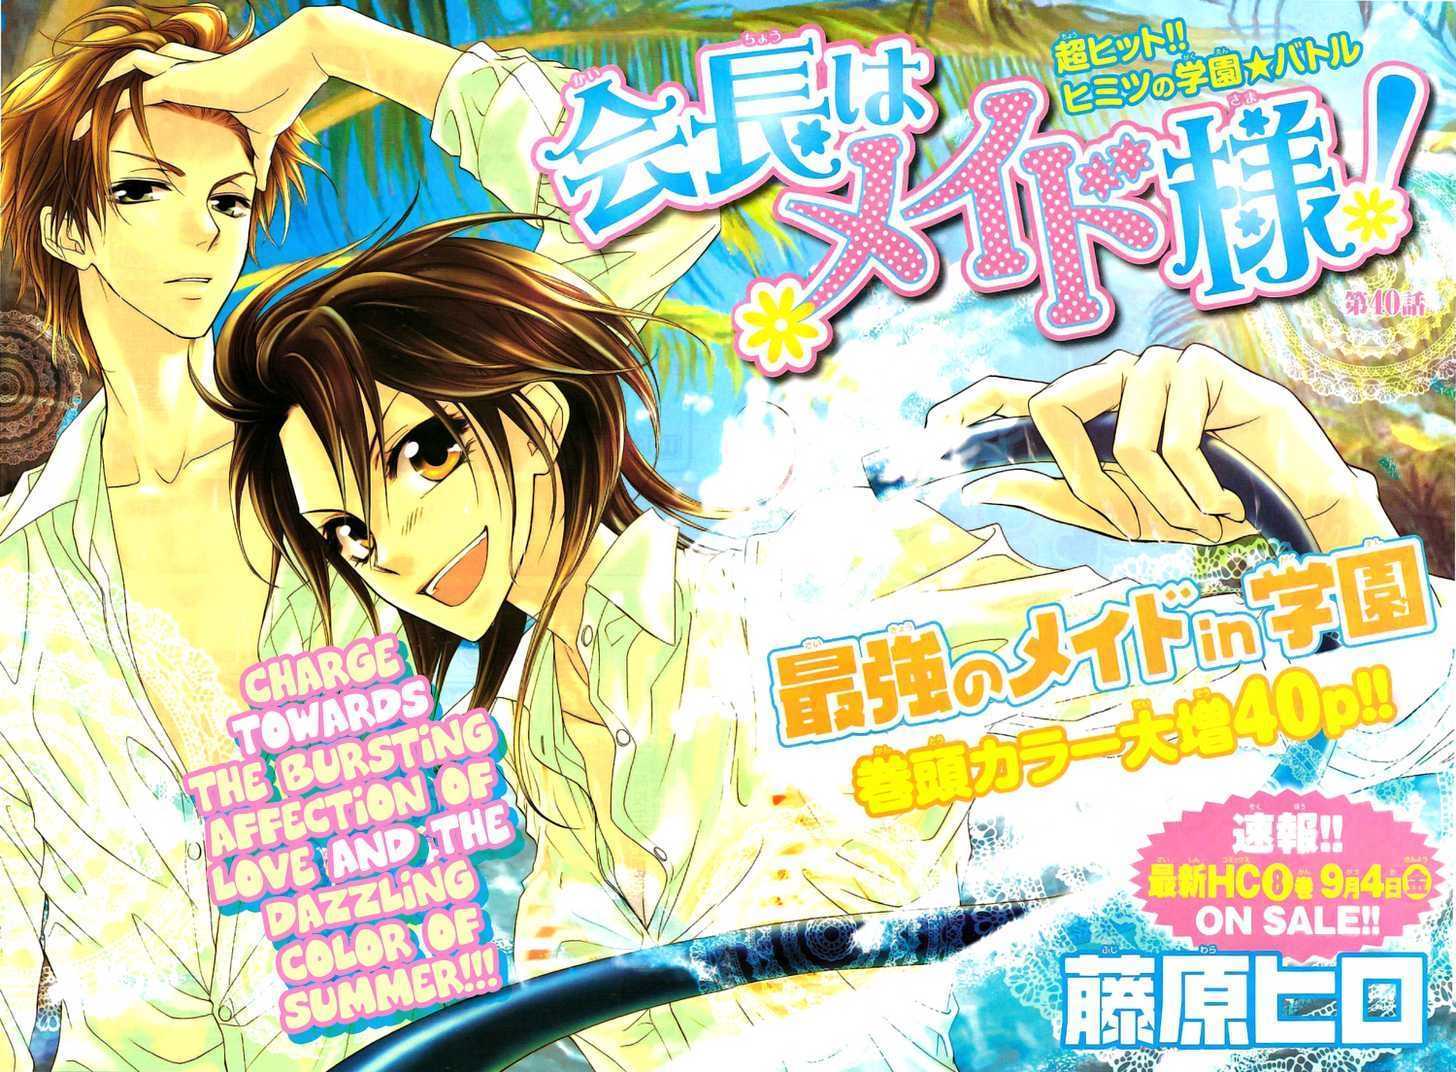 Kaichou Wa Maid-Sama! Vol.9 Chapter 40 : Charge Towards The Bursting Affection Of Love And The Dazzling Color Of Summer - Picture 2